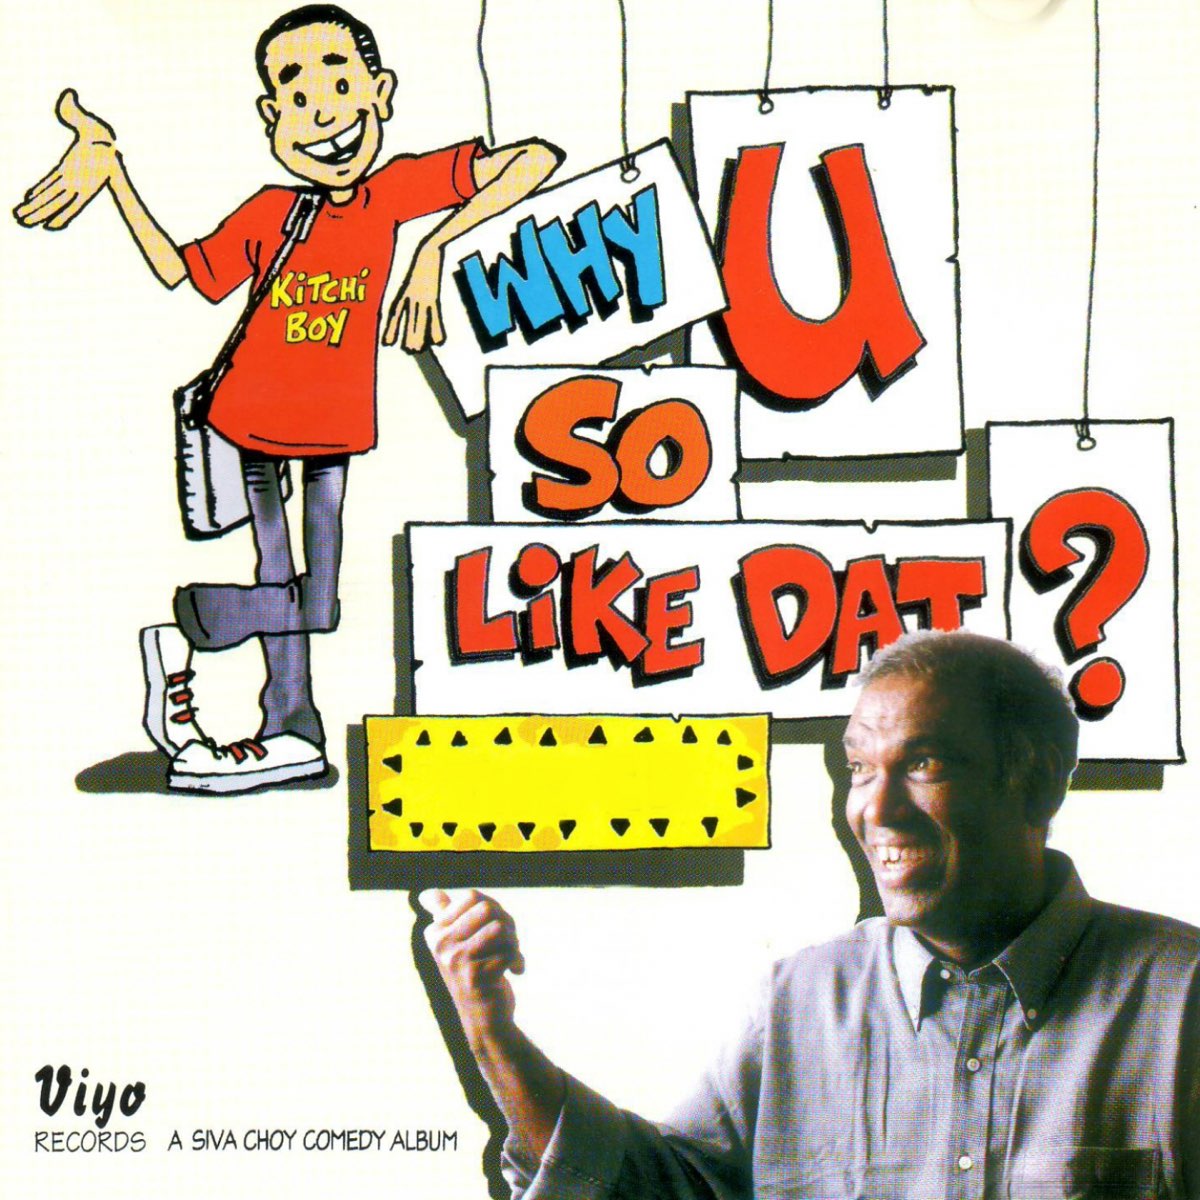 Why U so Like Dat? by Various Artists on Apple Music